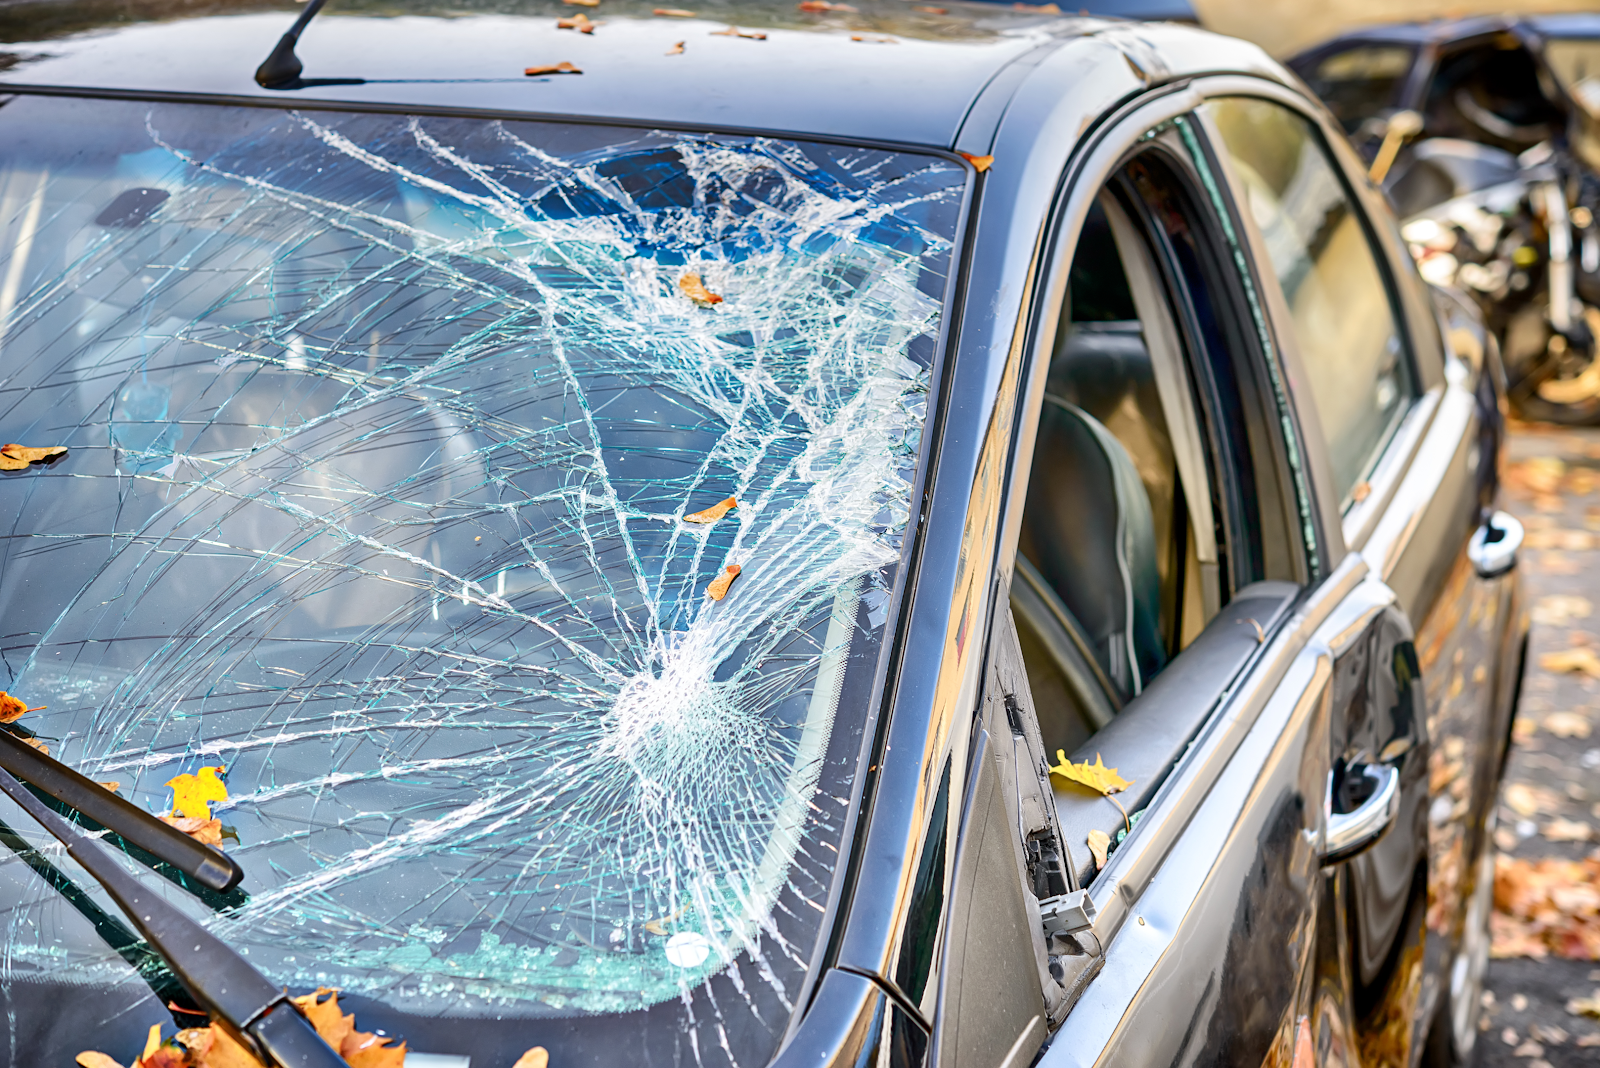 picture of the front windshield of a car shattered after a car accident that caused serious injury